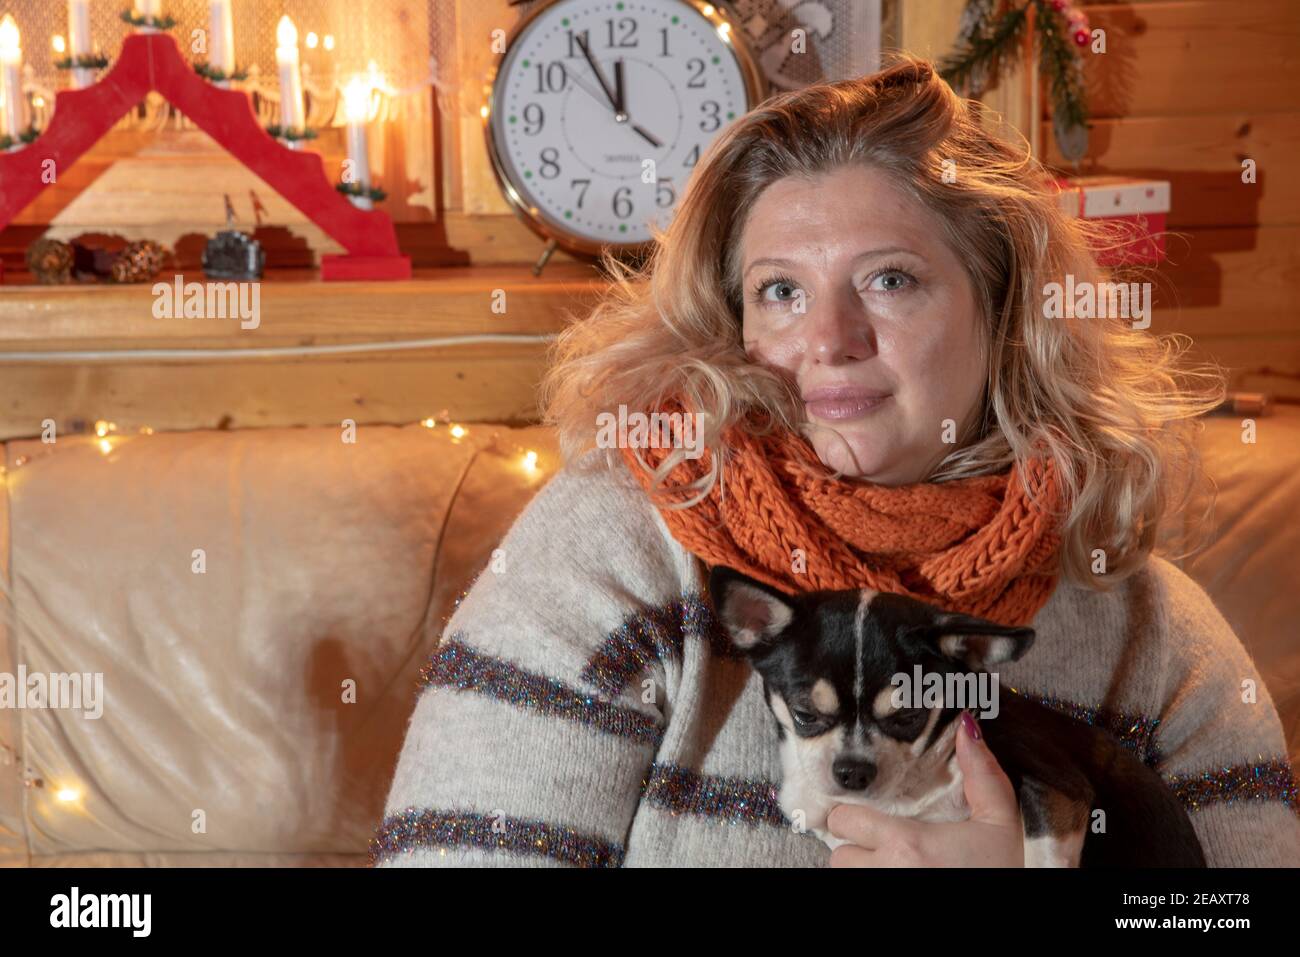 Portrait of a plump, middle-aged blonde woman sitting on a sofa with a Chihuahua . Stock Photo